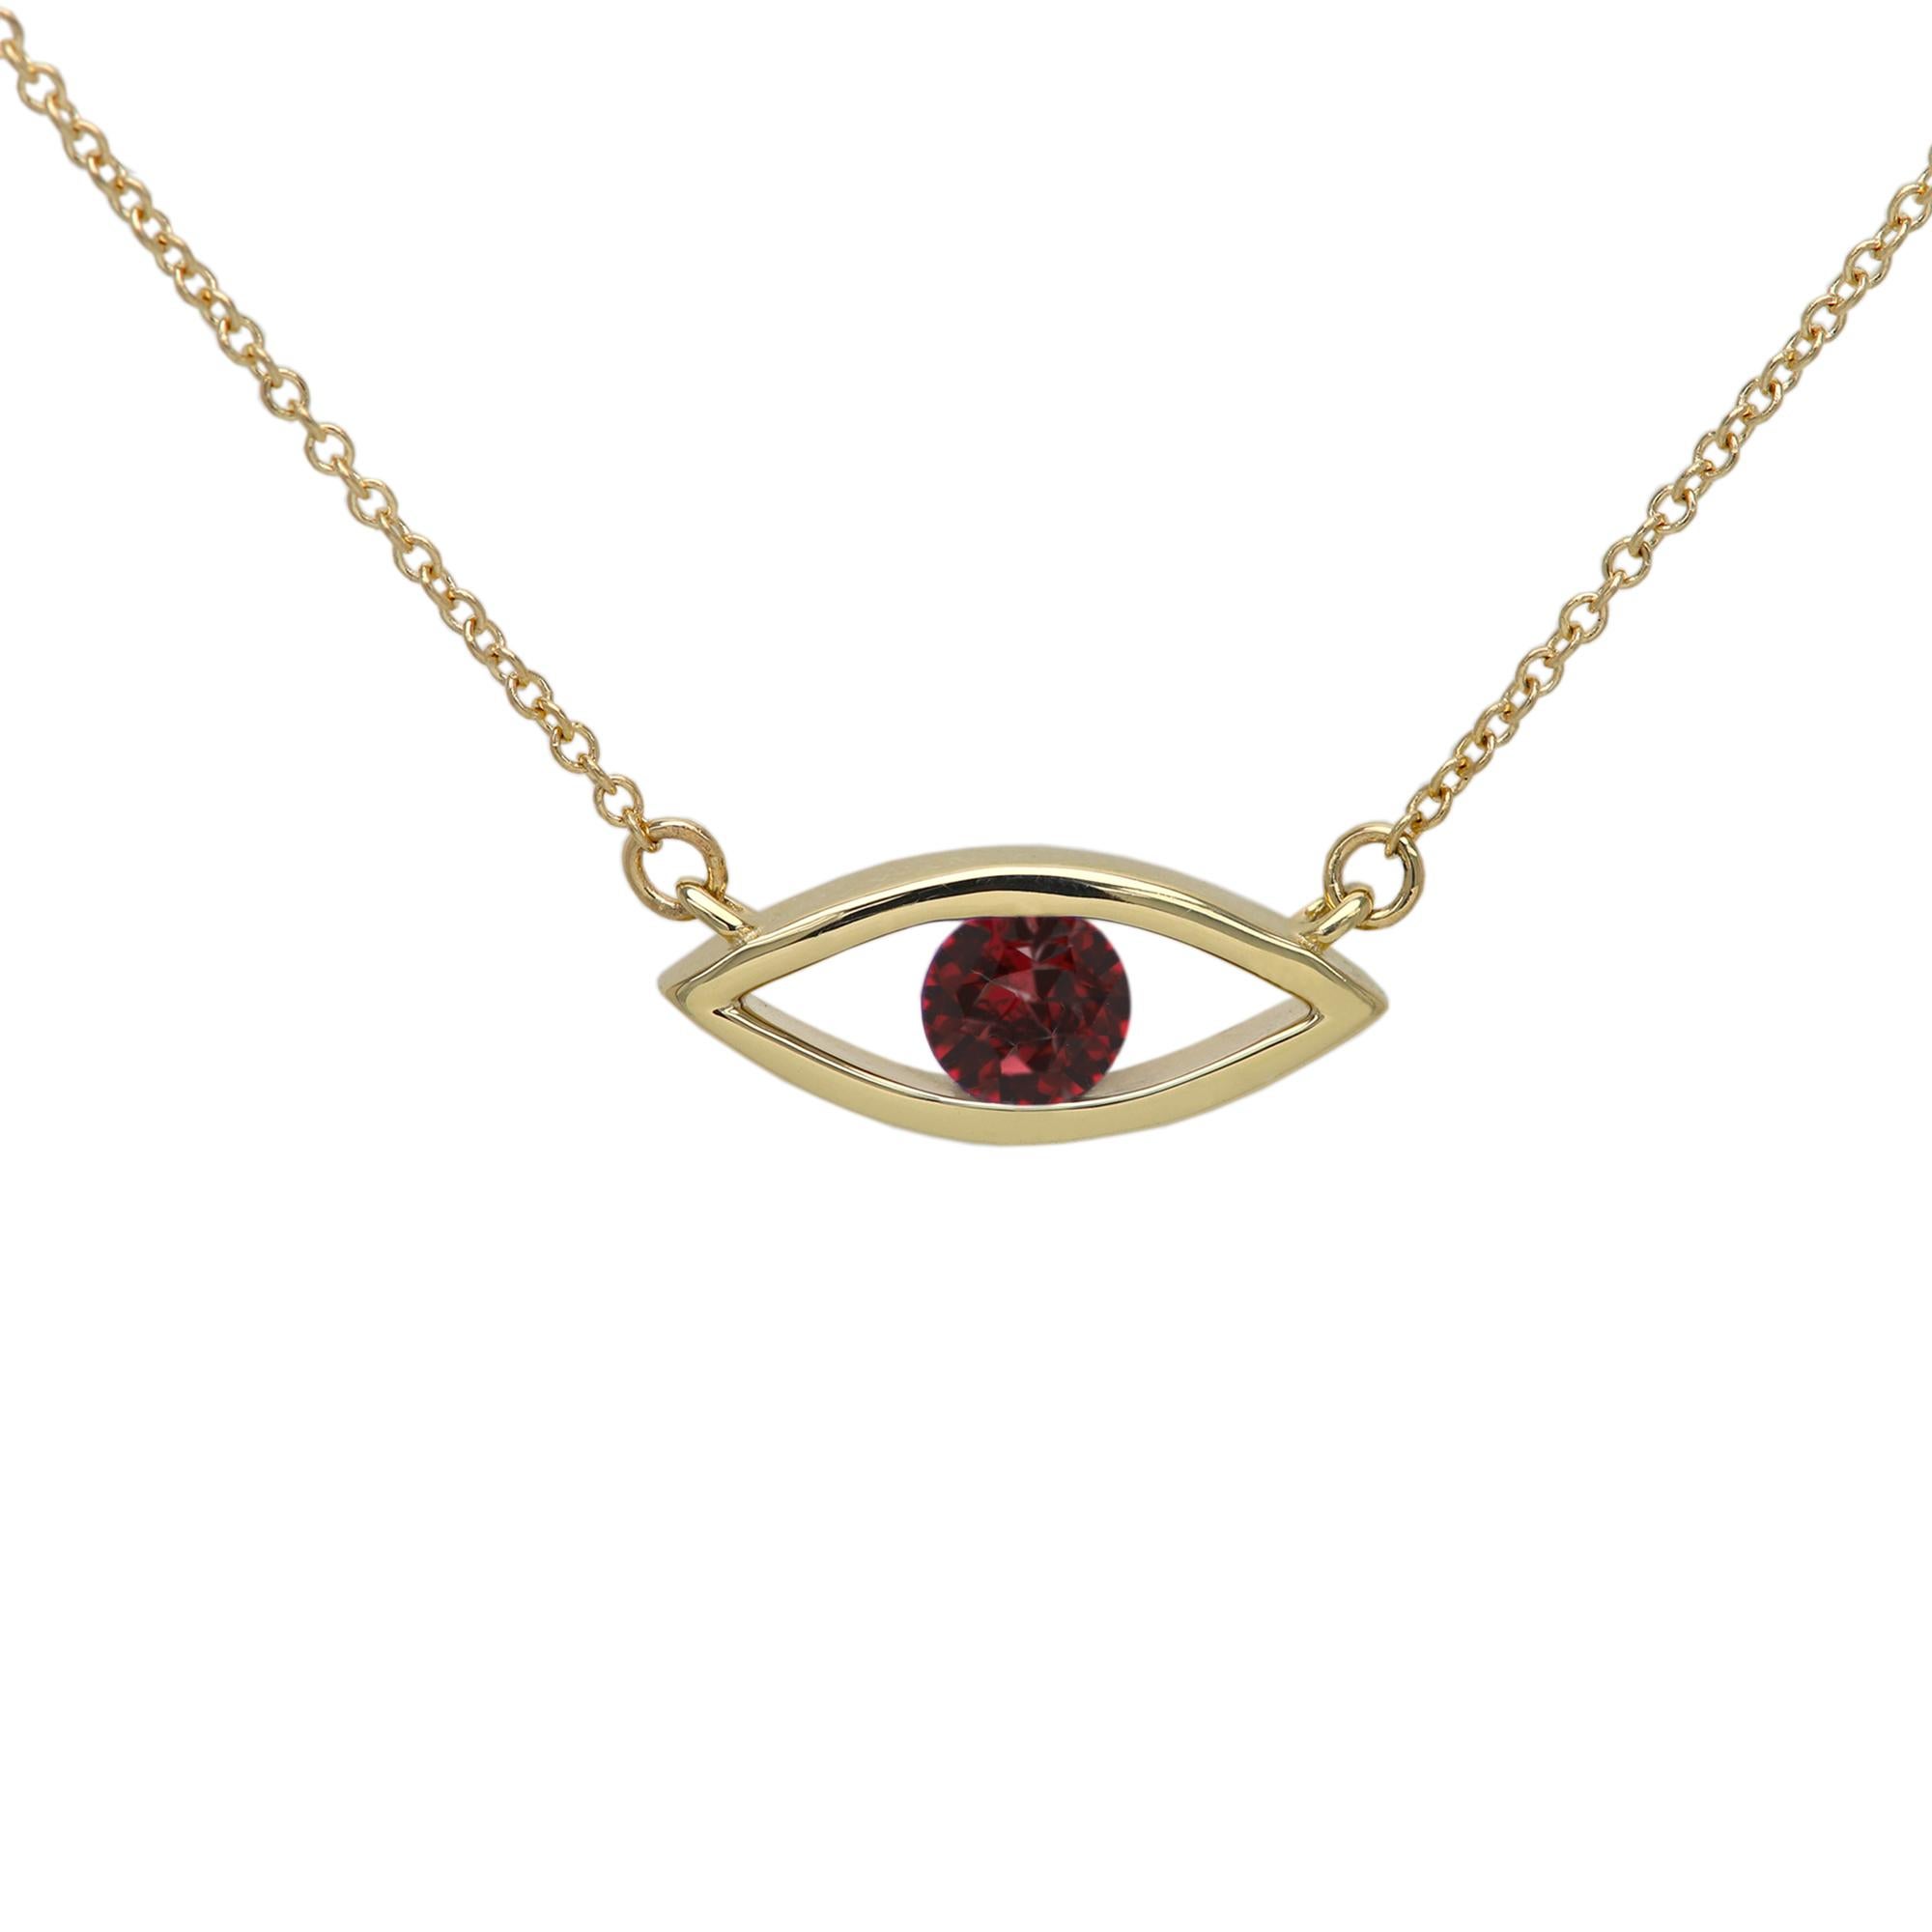 New, Very Elegant & Lovely Evil Eye Birthstone Necklace Solid 14k Yellow Gold with Natural Garnet gemstone 
Set in Yellow Gold Evil Eye - Good Luck & protection Necklace
Classic Cable Chain and Lobster Lock - all 14k, 
Chain Length - as your own